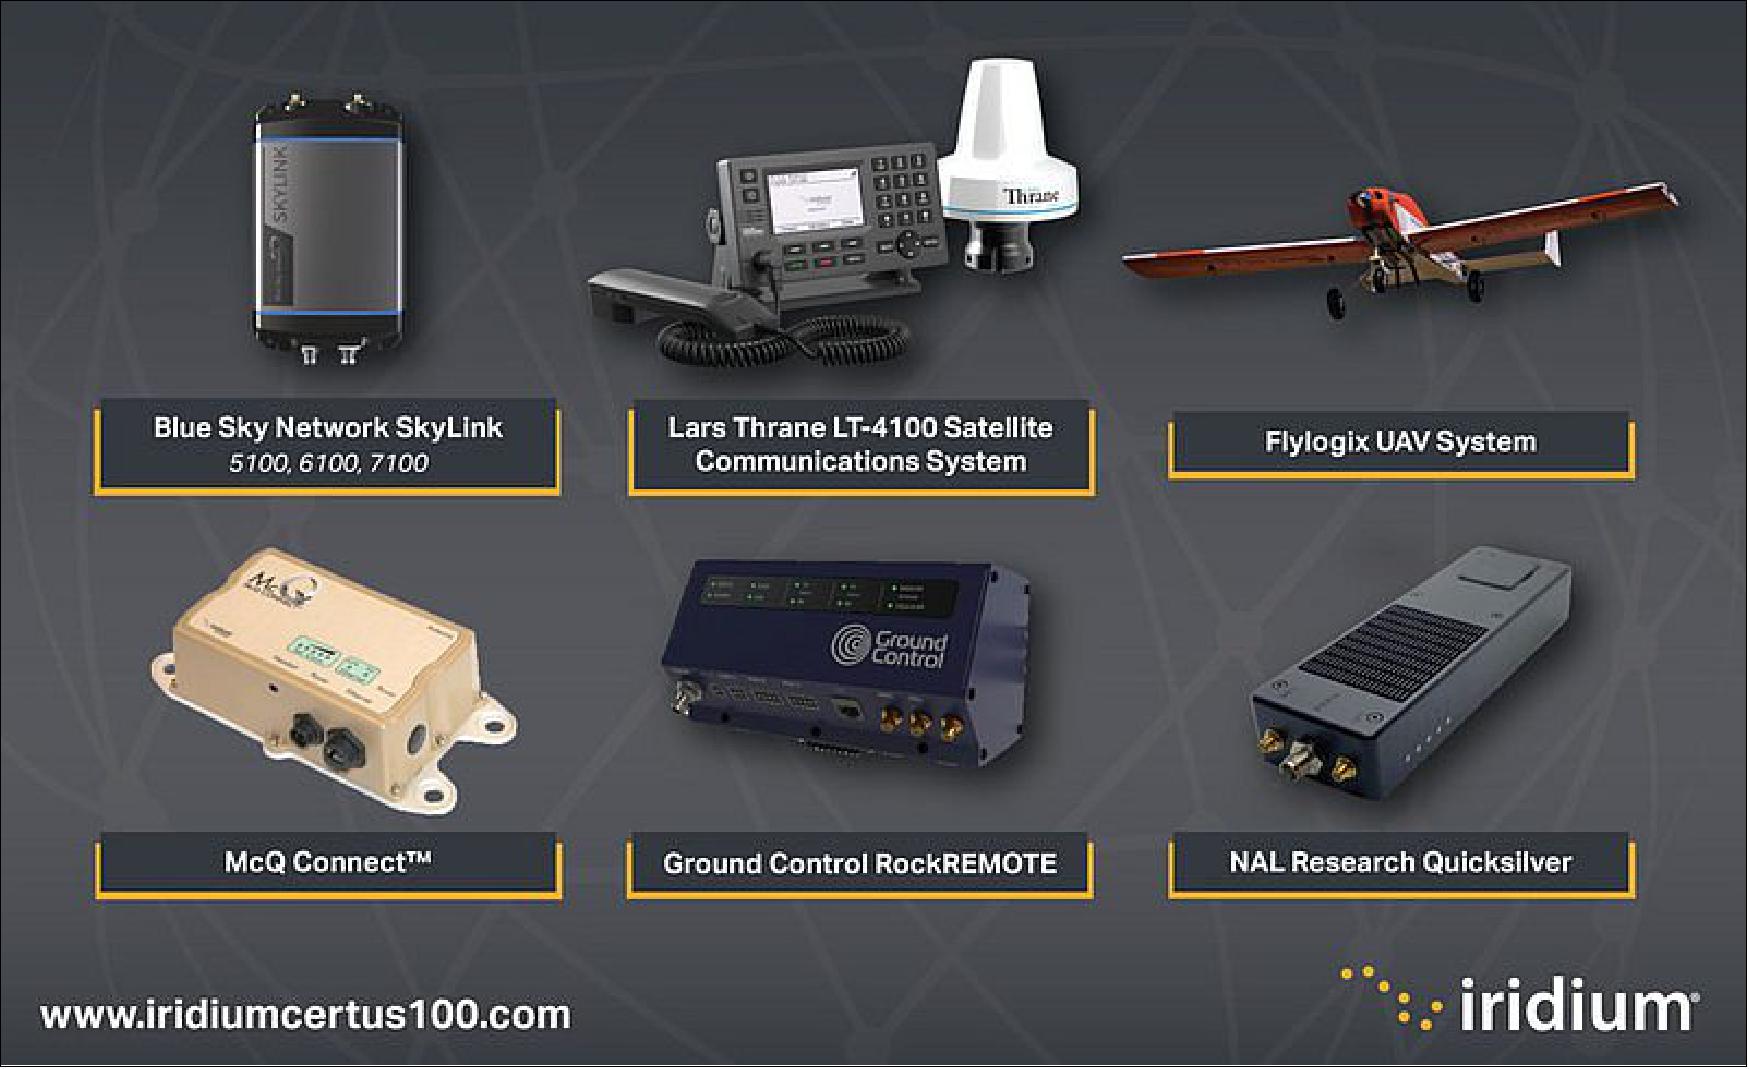 Figure 8: Iridium Certus 100 debuts with several new Iridium Connected® partner products and is designed to address market demand for new satcom solutions requiring small form factor and battery or line-powered mobile equipment, capable of two-way IP data and high-quality voice services. No other satellite operator can provide this range of capabilities over the whole planet, enabling new classes of connected products (image credit: Iridium Certus)